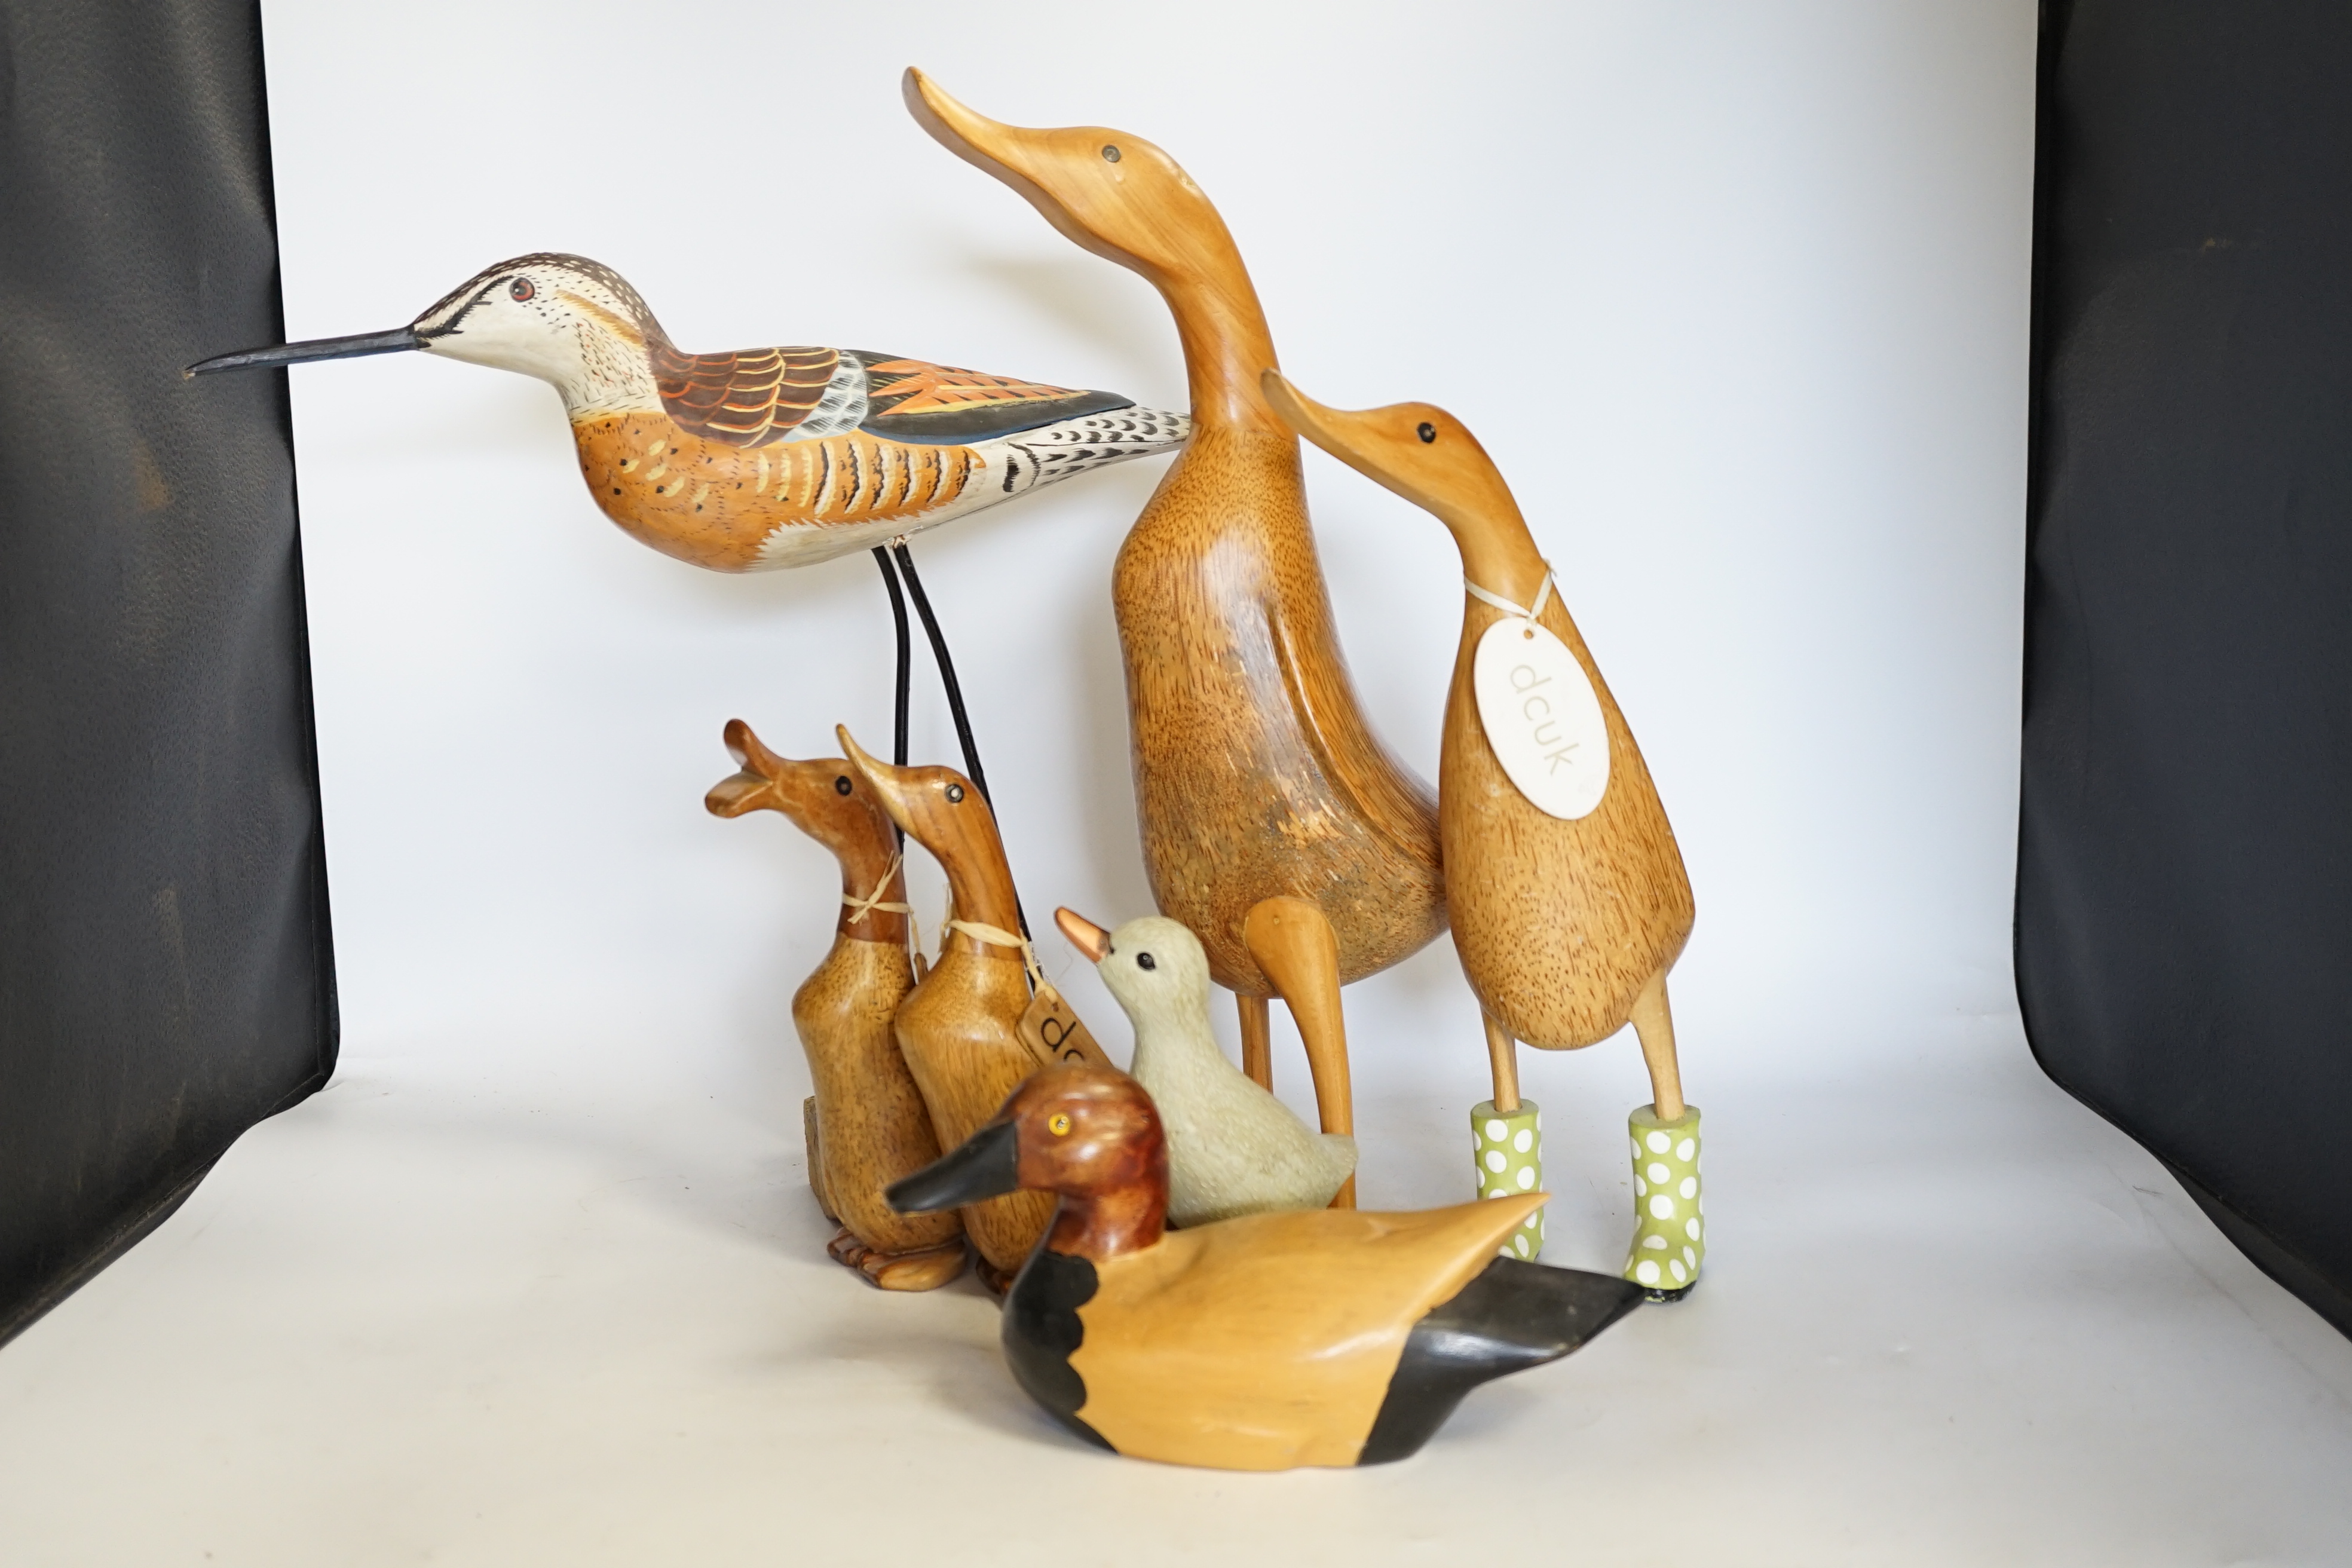 A collection of wooden painted ducks and waders